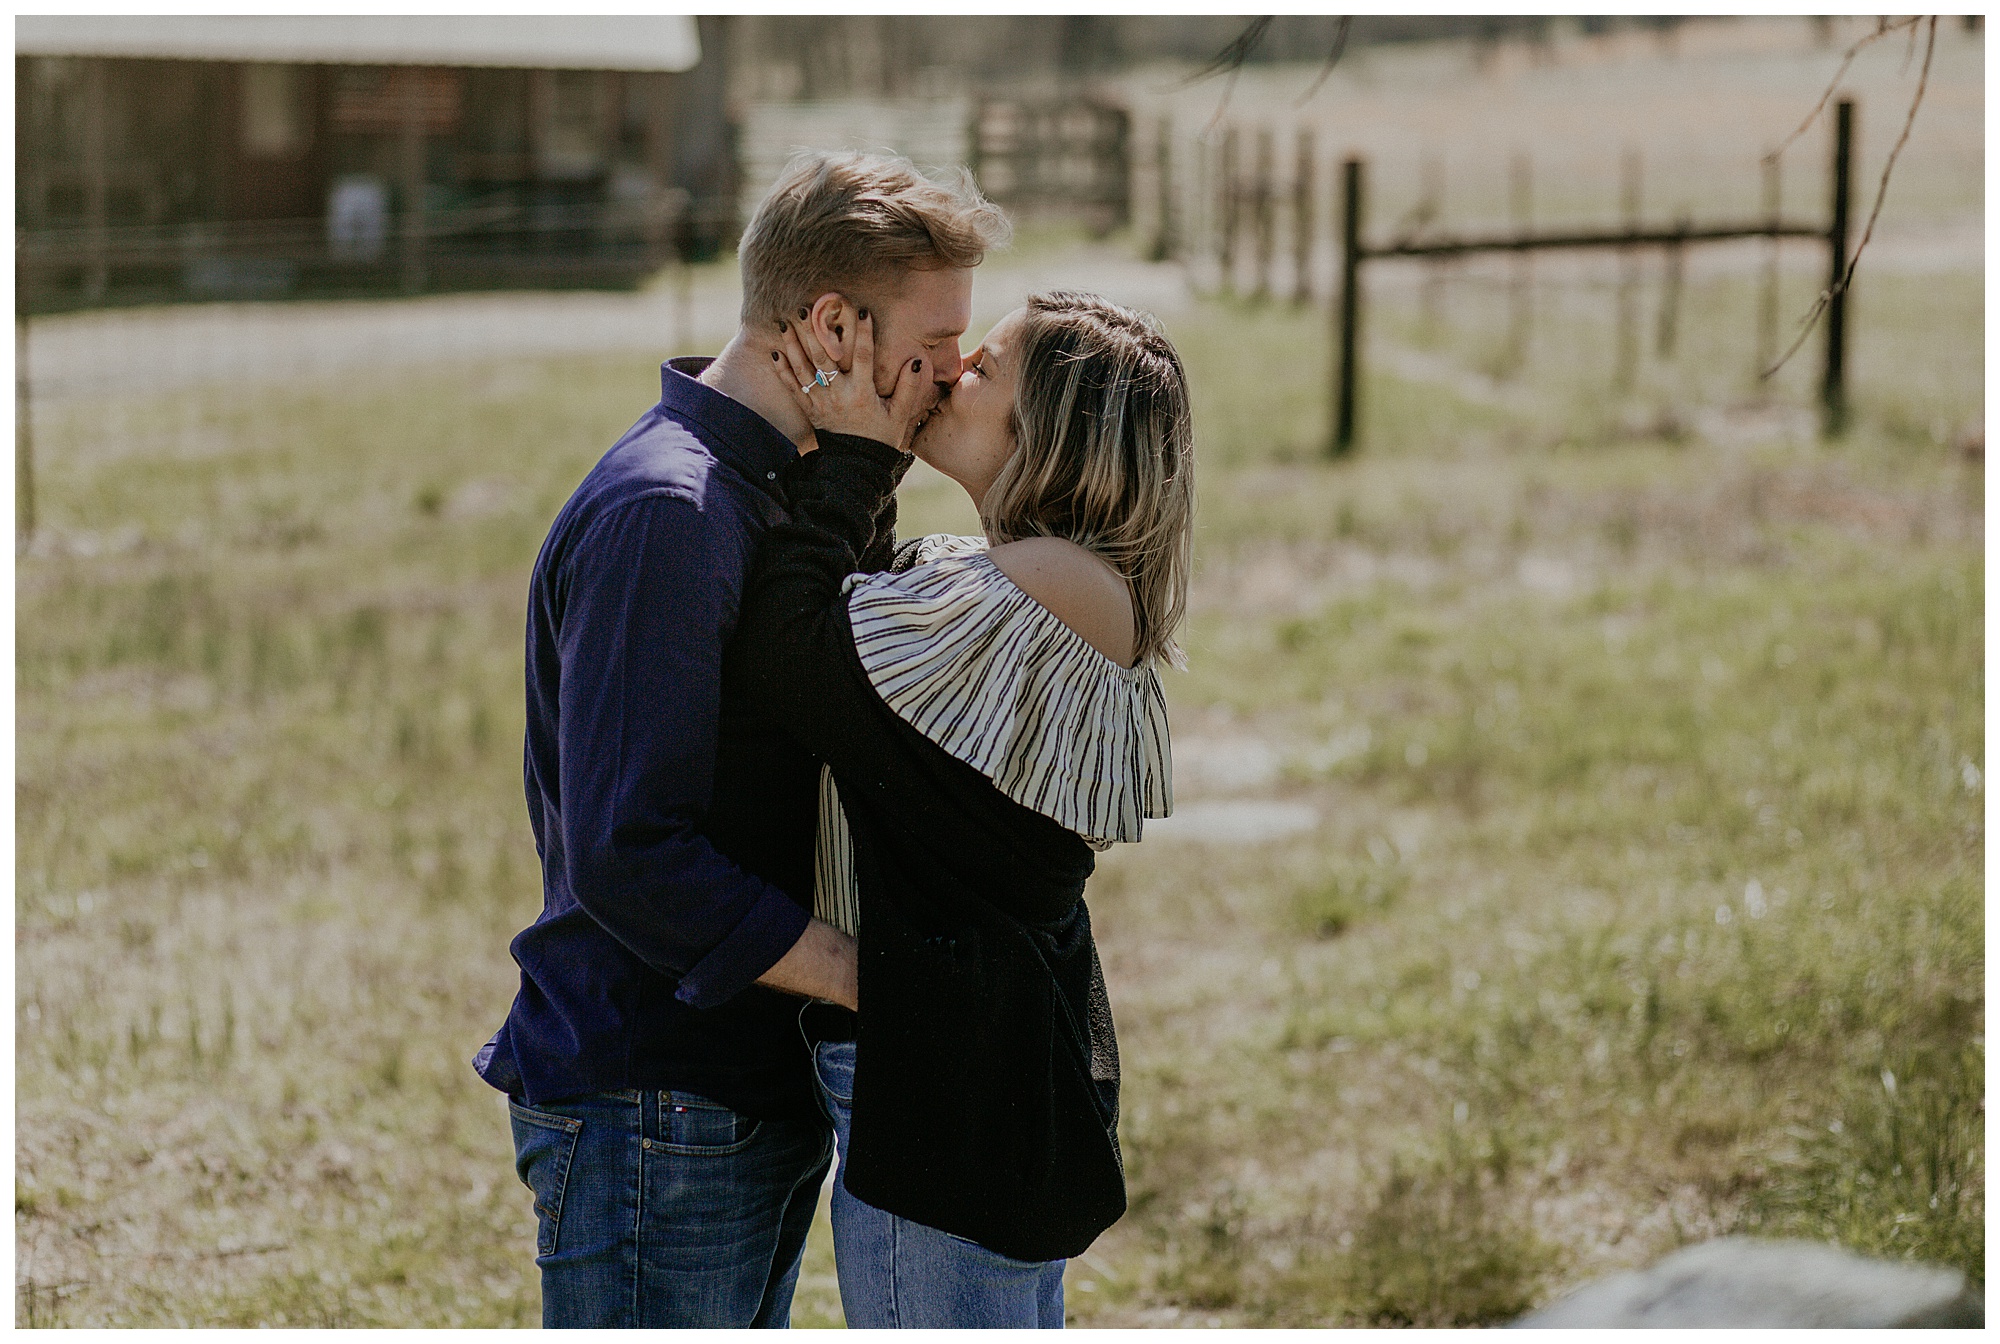 This Nashville surprise proposal was so sweet at the farm at Cedar springs.